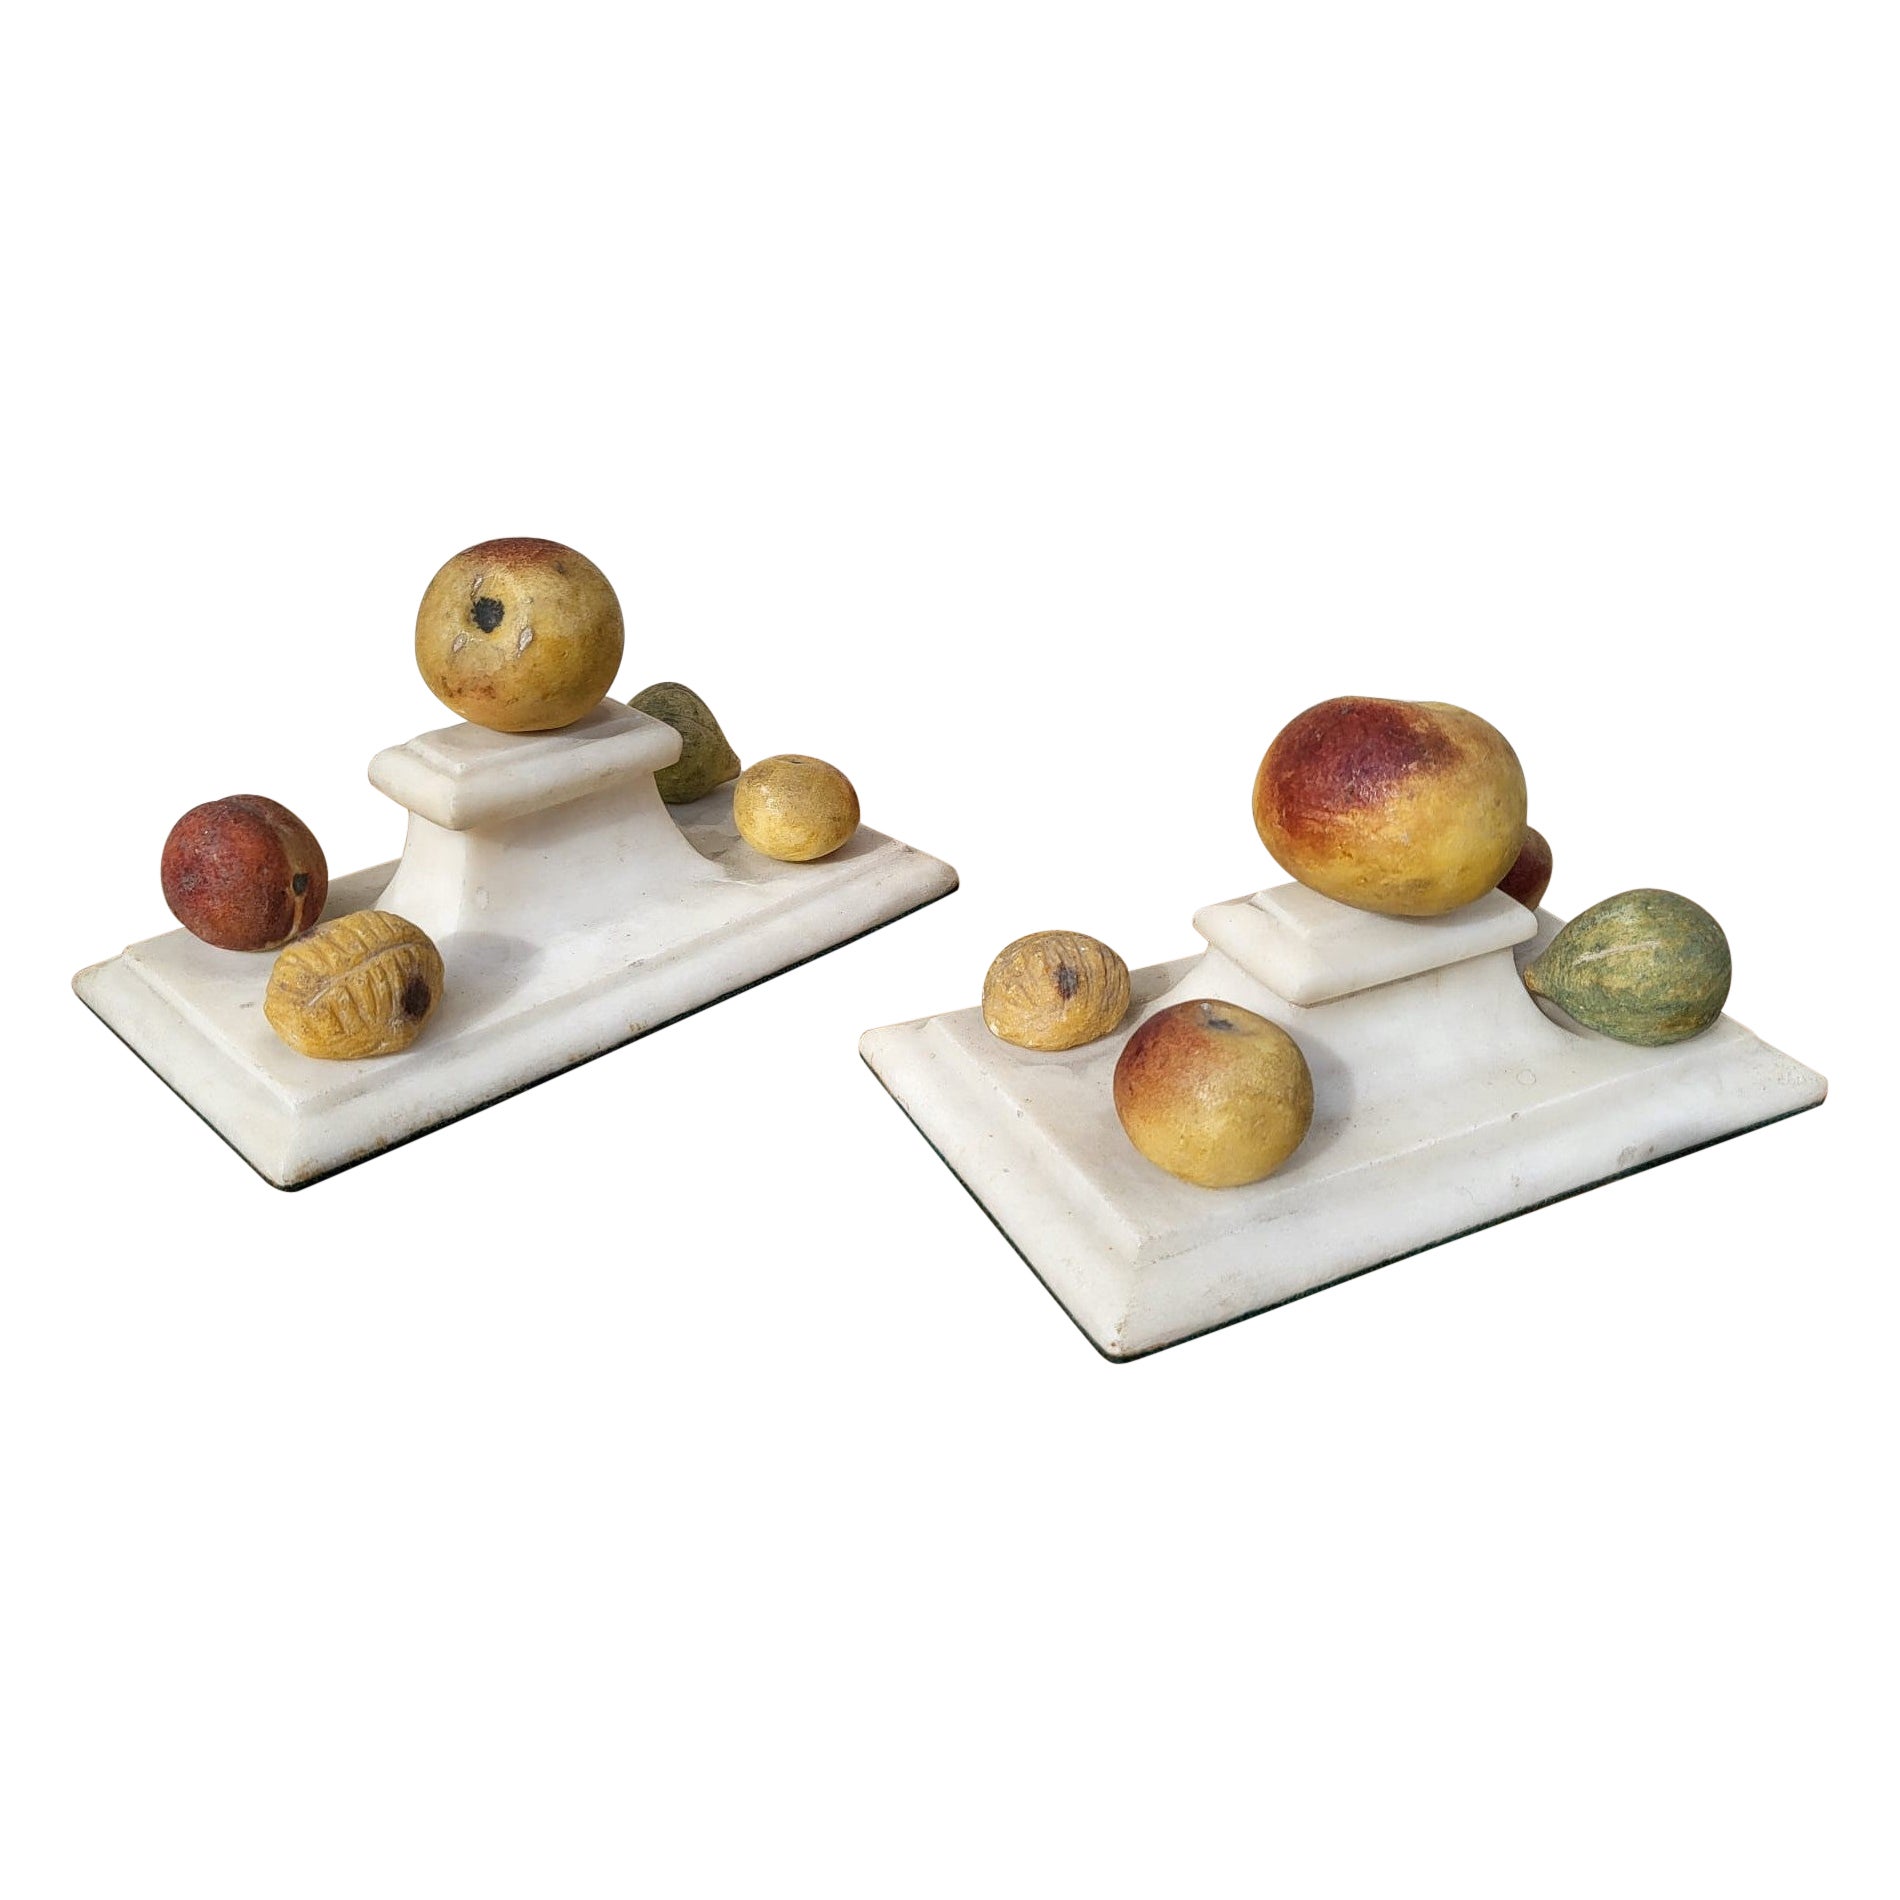 Pair of Marble Paperweight with Fruits, XIXth Century